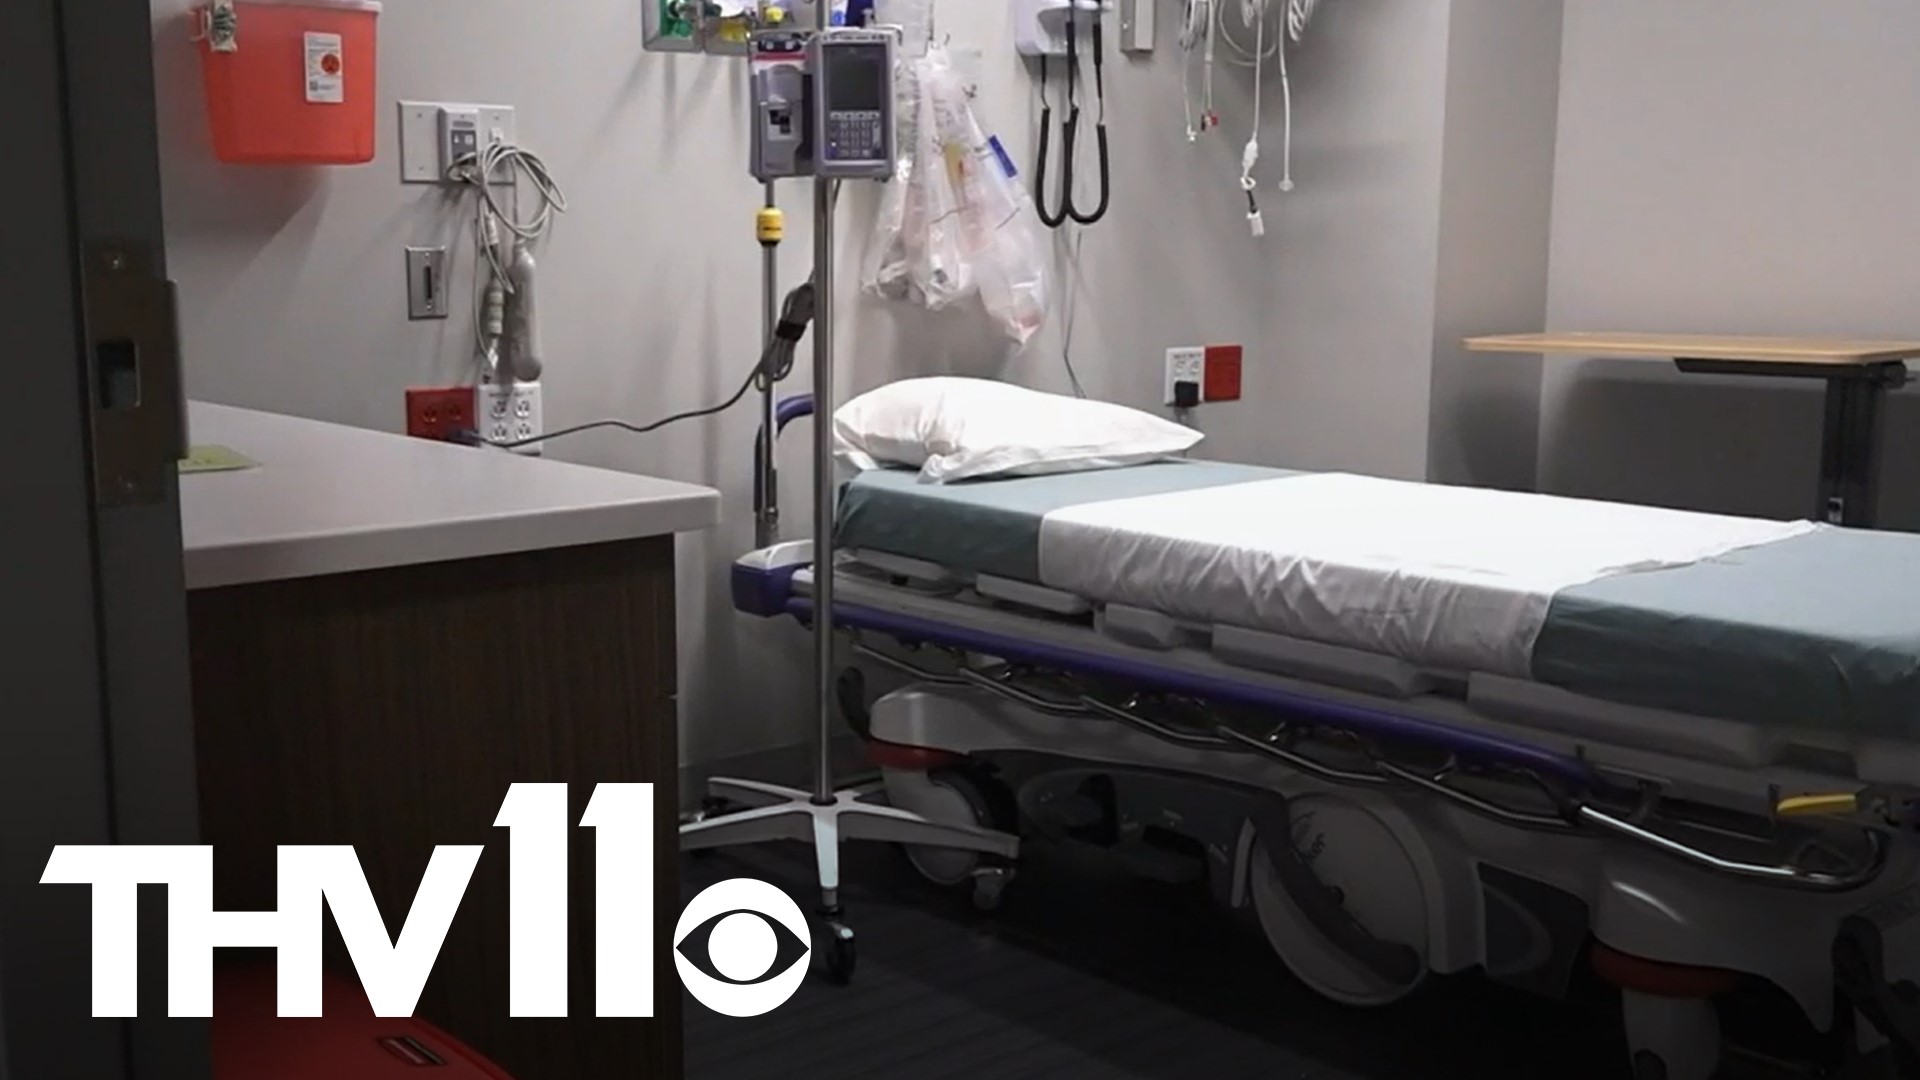 Recent data from the CDC shows COVID-related hospitalizations are on the rise in Arkansas.